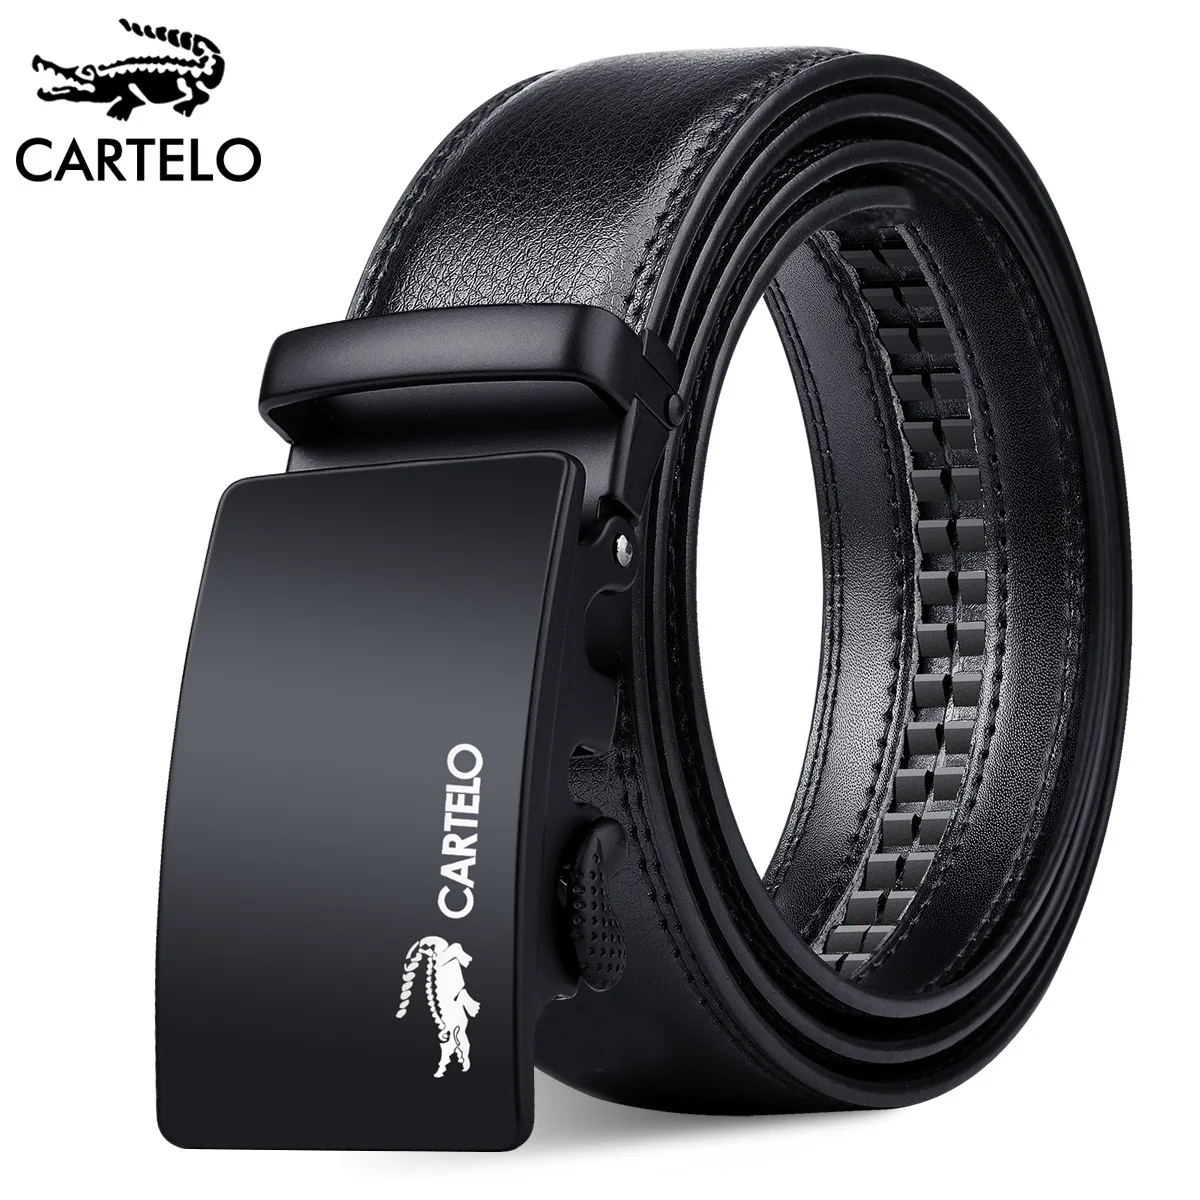 CARTELO High Quality Leather Belt Men Automatic Buckle Two-layer Cowhide Black Leather Belt Middle-aged Young Business Work Belt